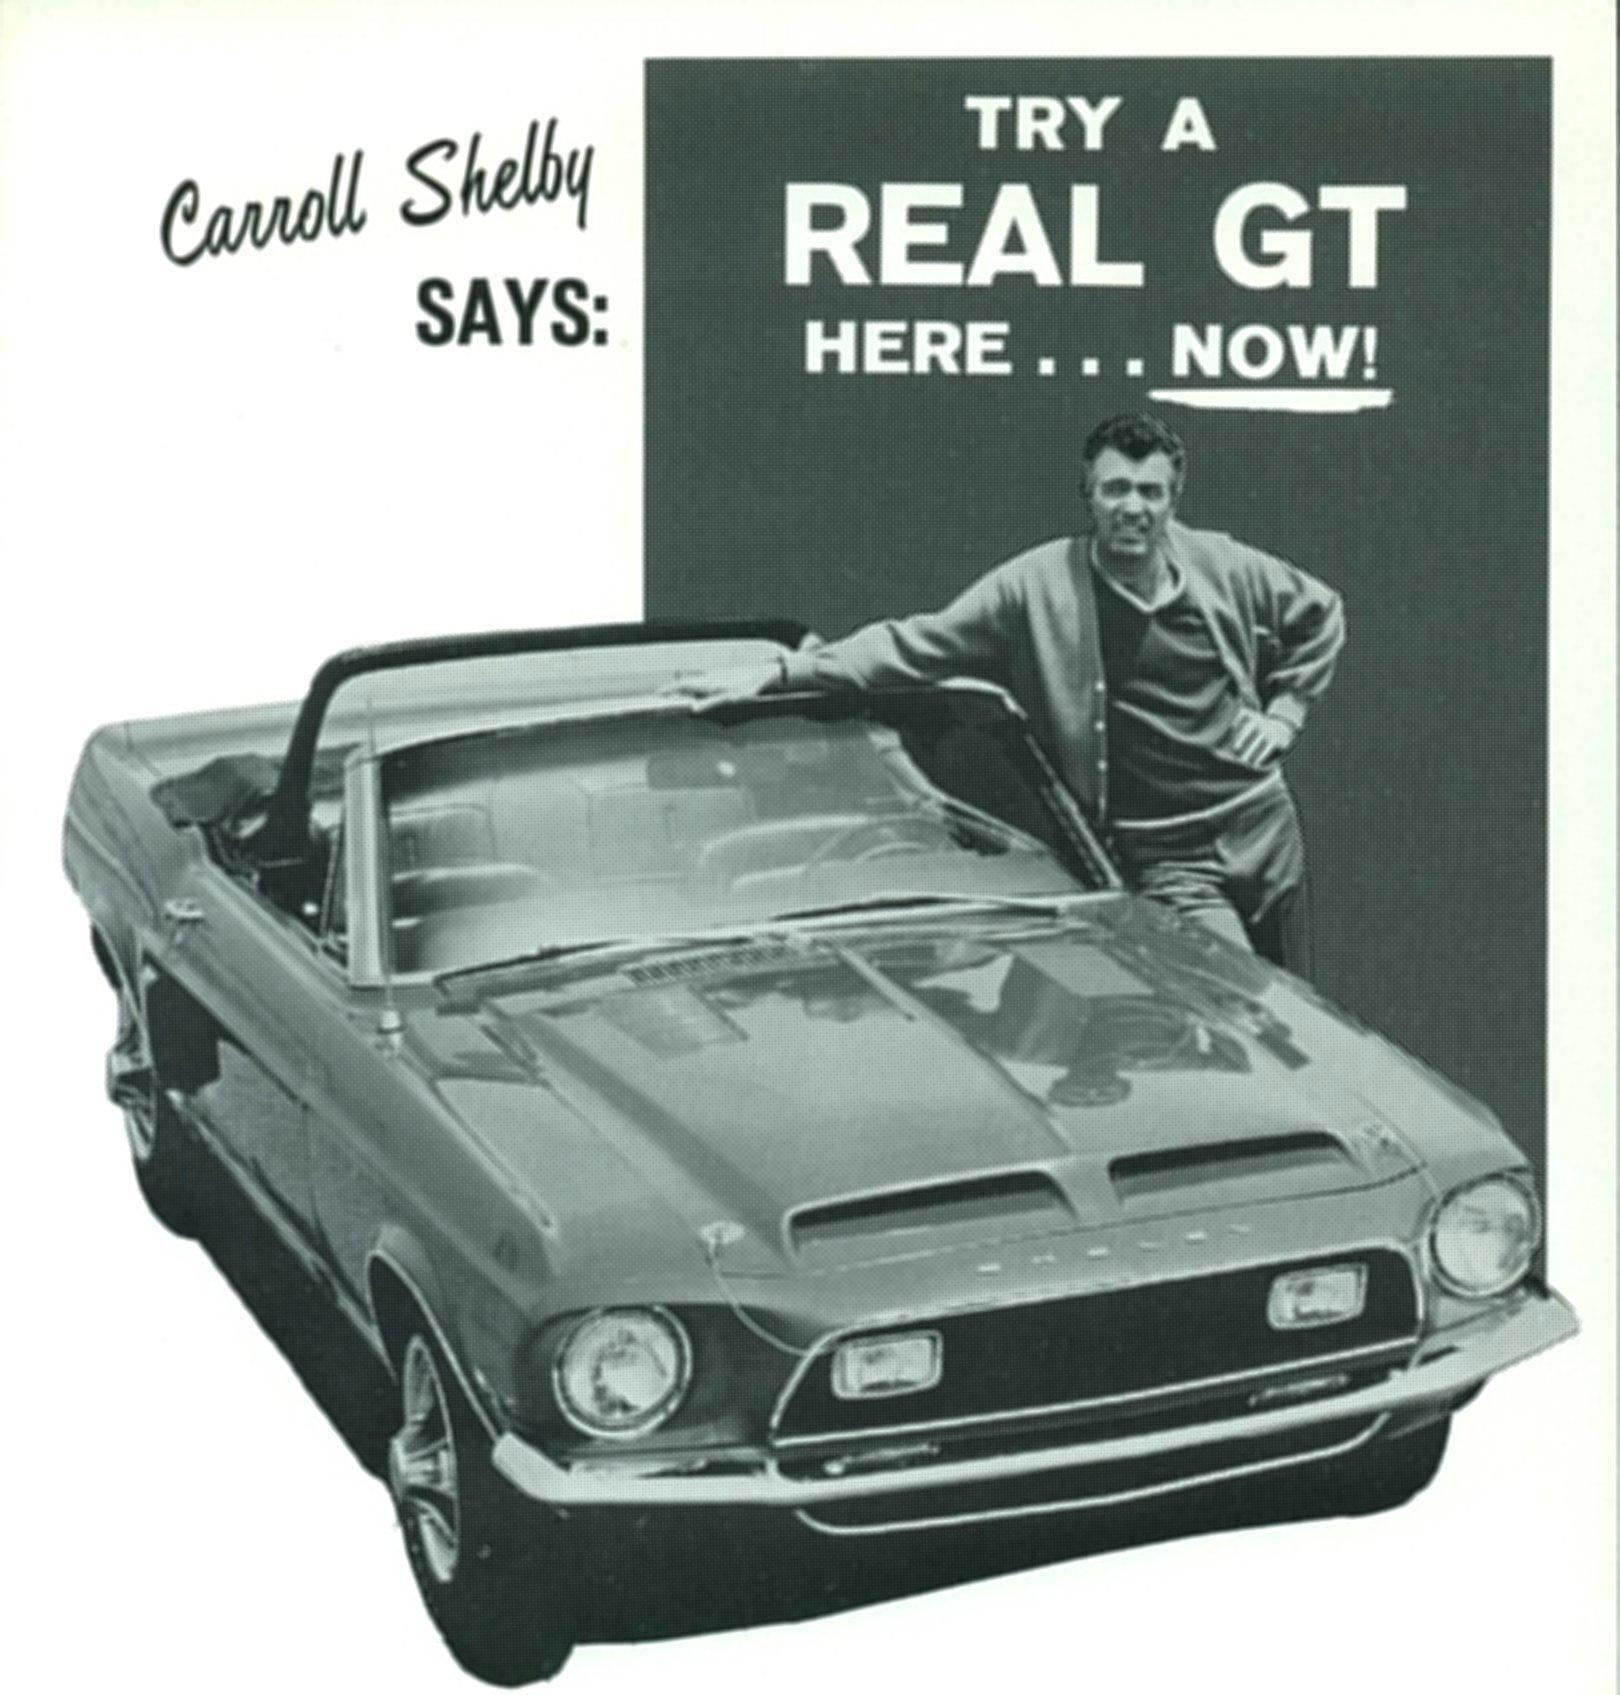 Carroll Shelby Says - Try a Real GT Here ... Now cropped.jpg